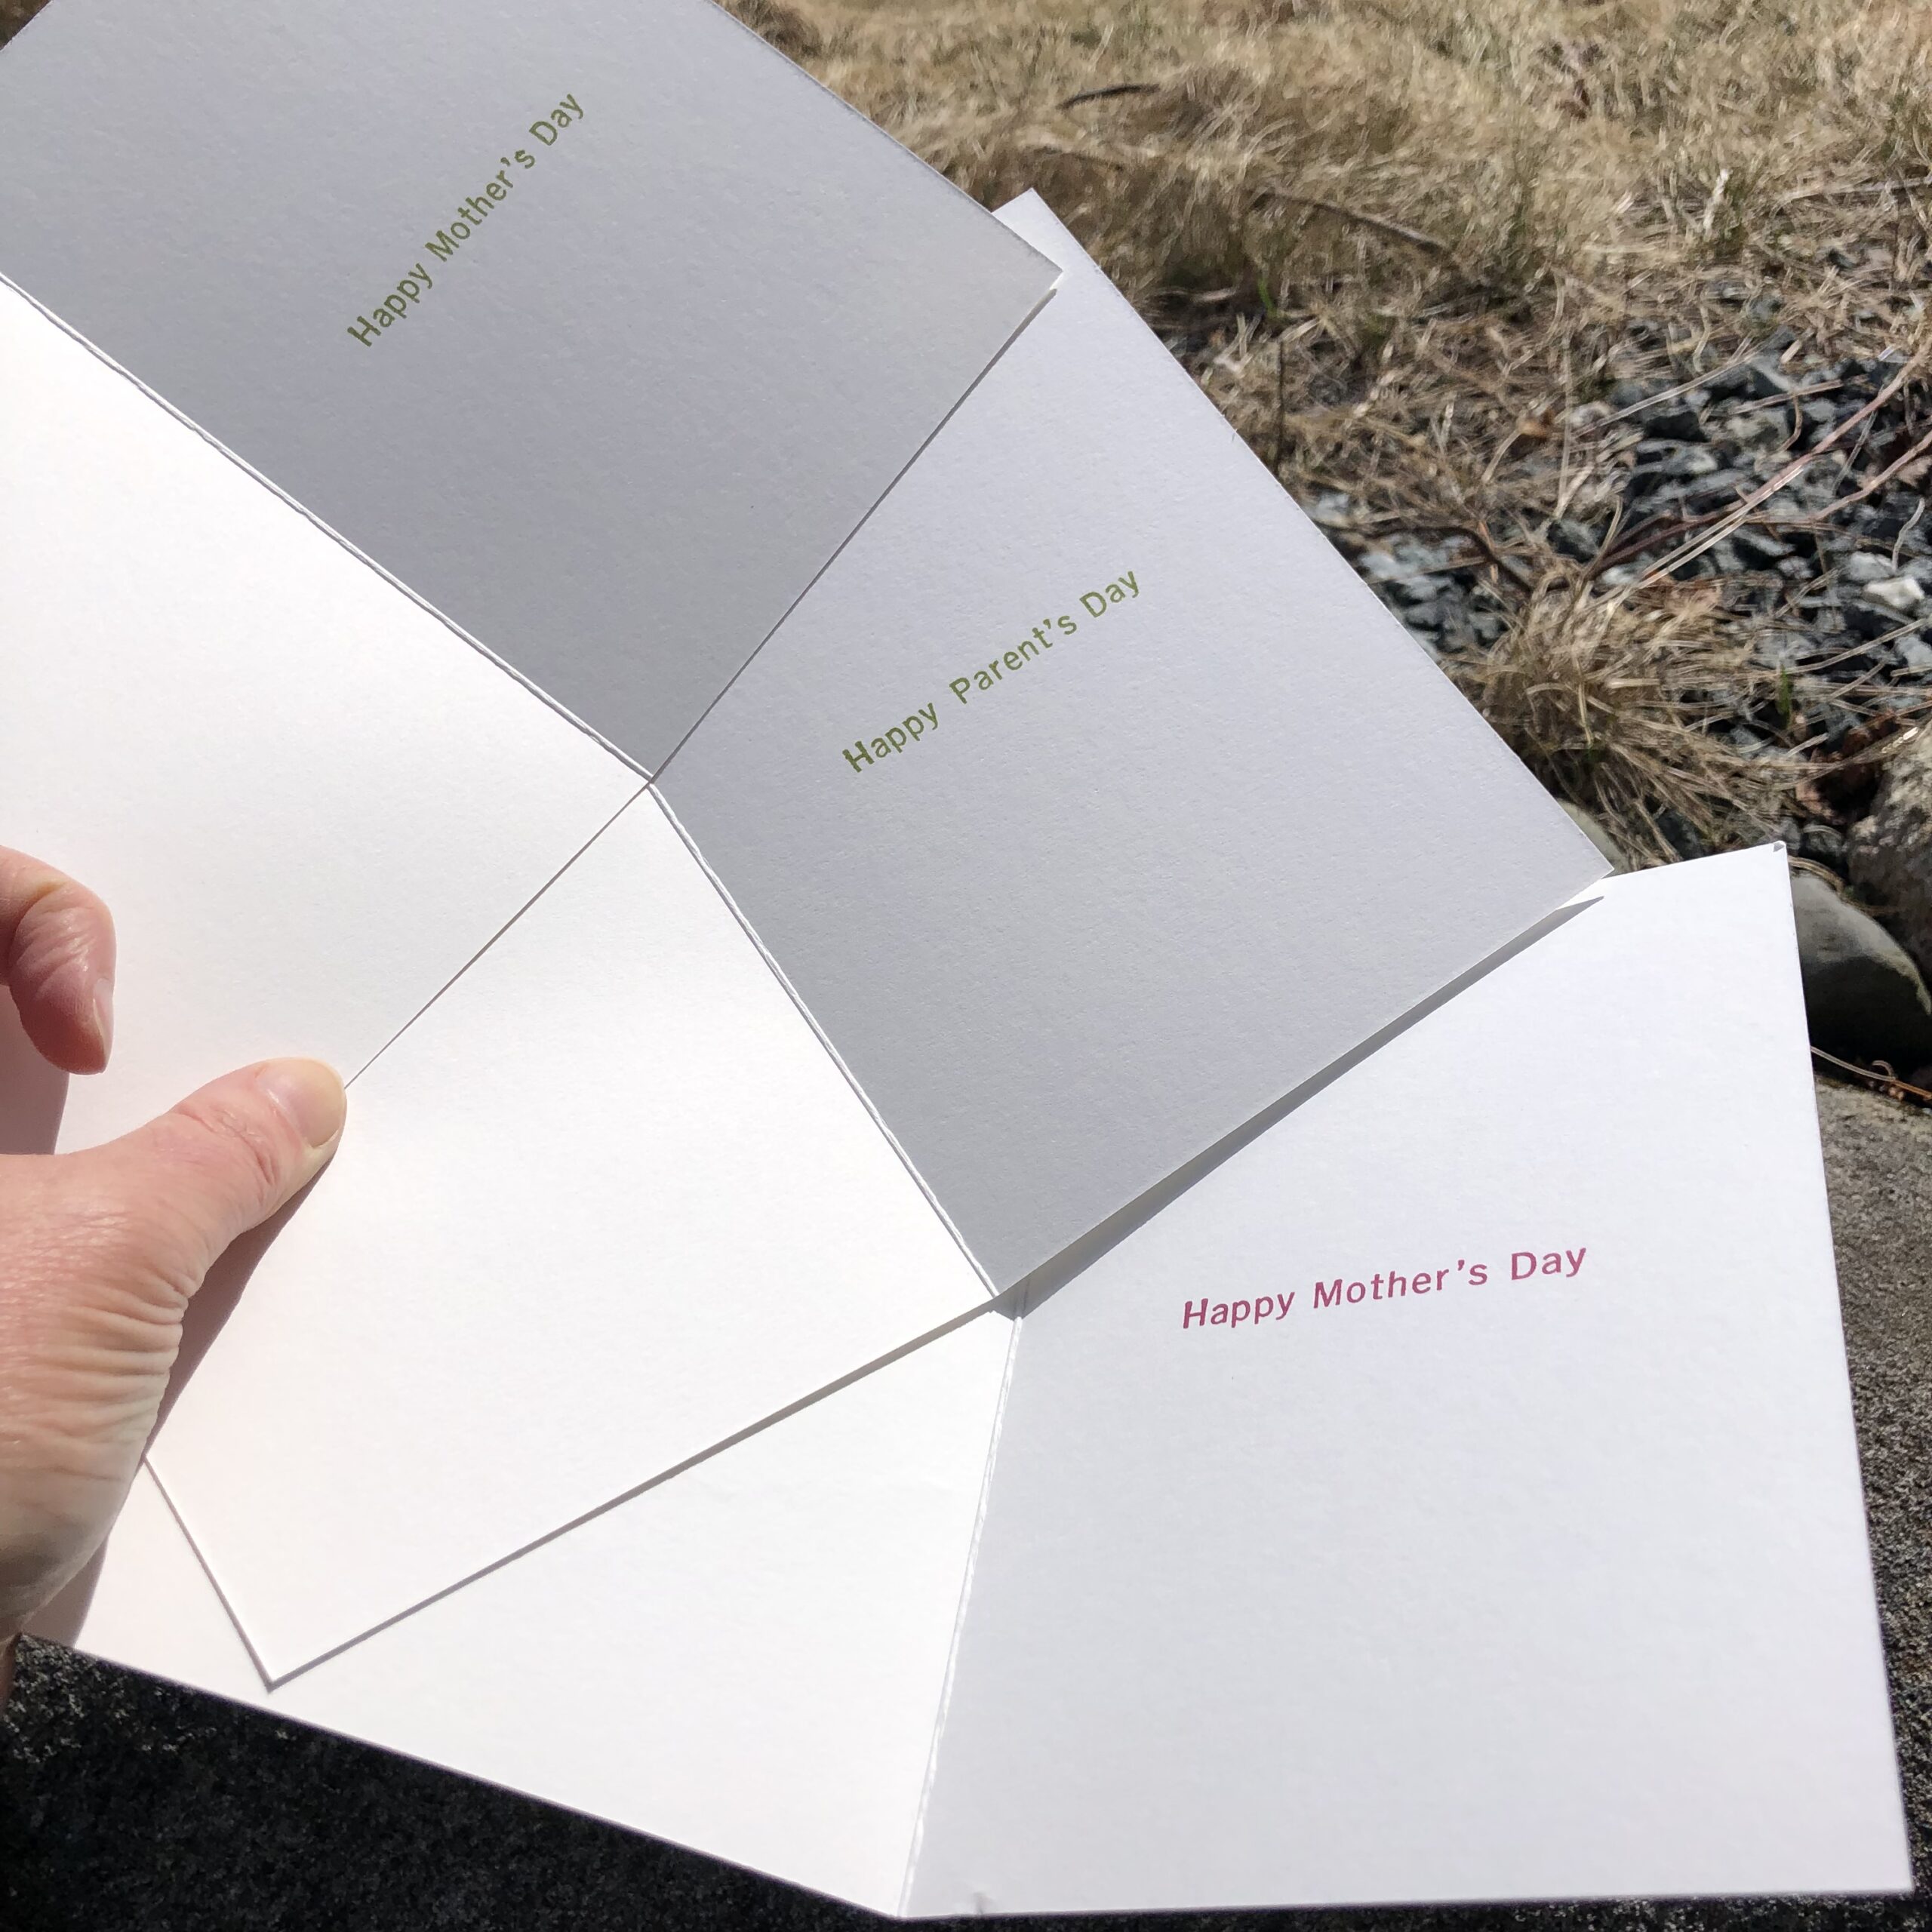 Three white cards fanned to show interior messages: Happy Mother’s Day and Happy Parent’s Day.